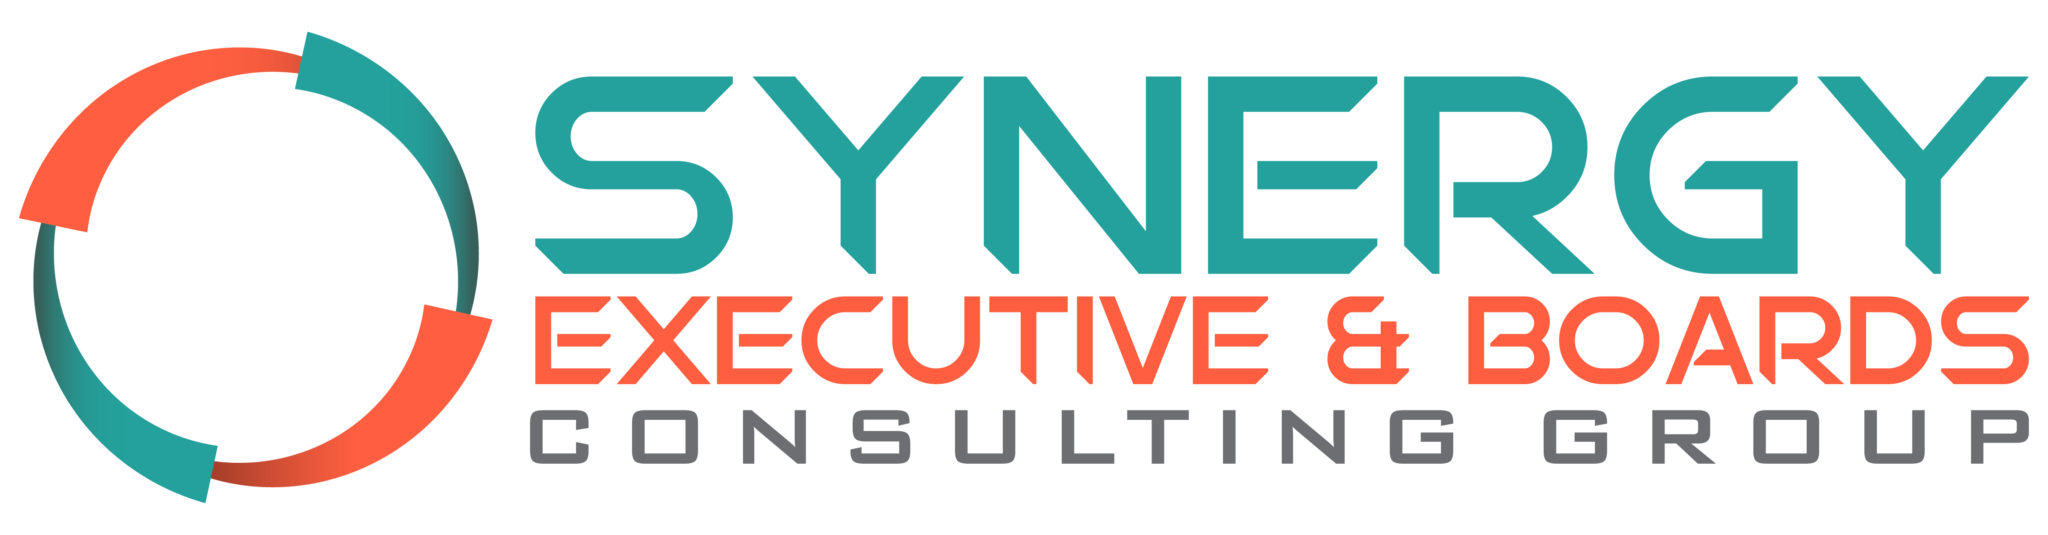 Synergy Executive & Boards Consulting Group